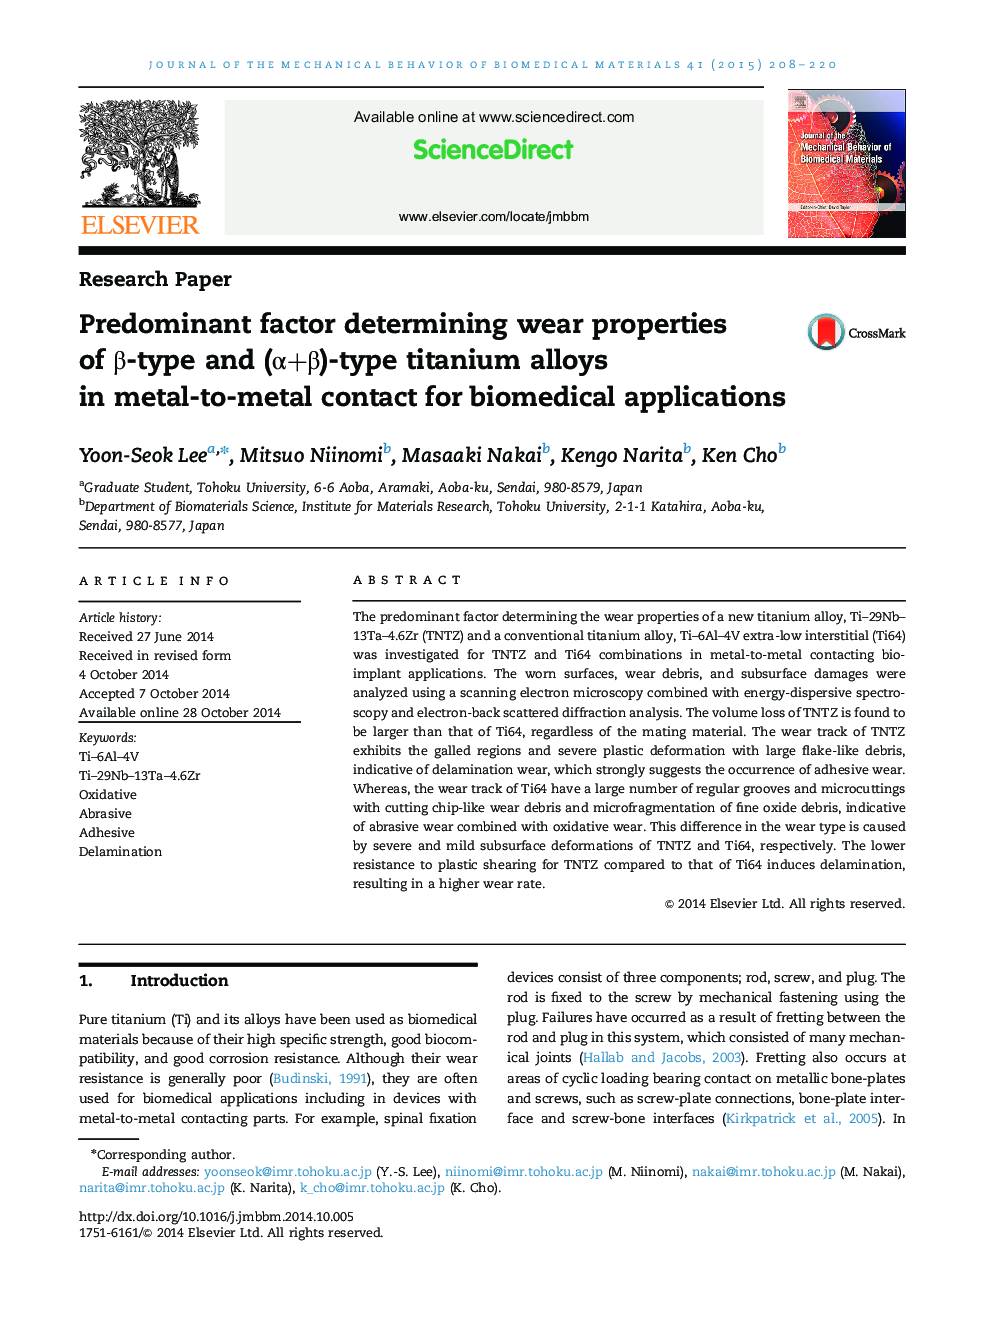 Predominant factor determining wear properties of Î²-type and (Î±+Î²)-type titanium alloys in metal-to-metal contact for biomedical applications